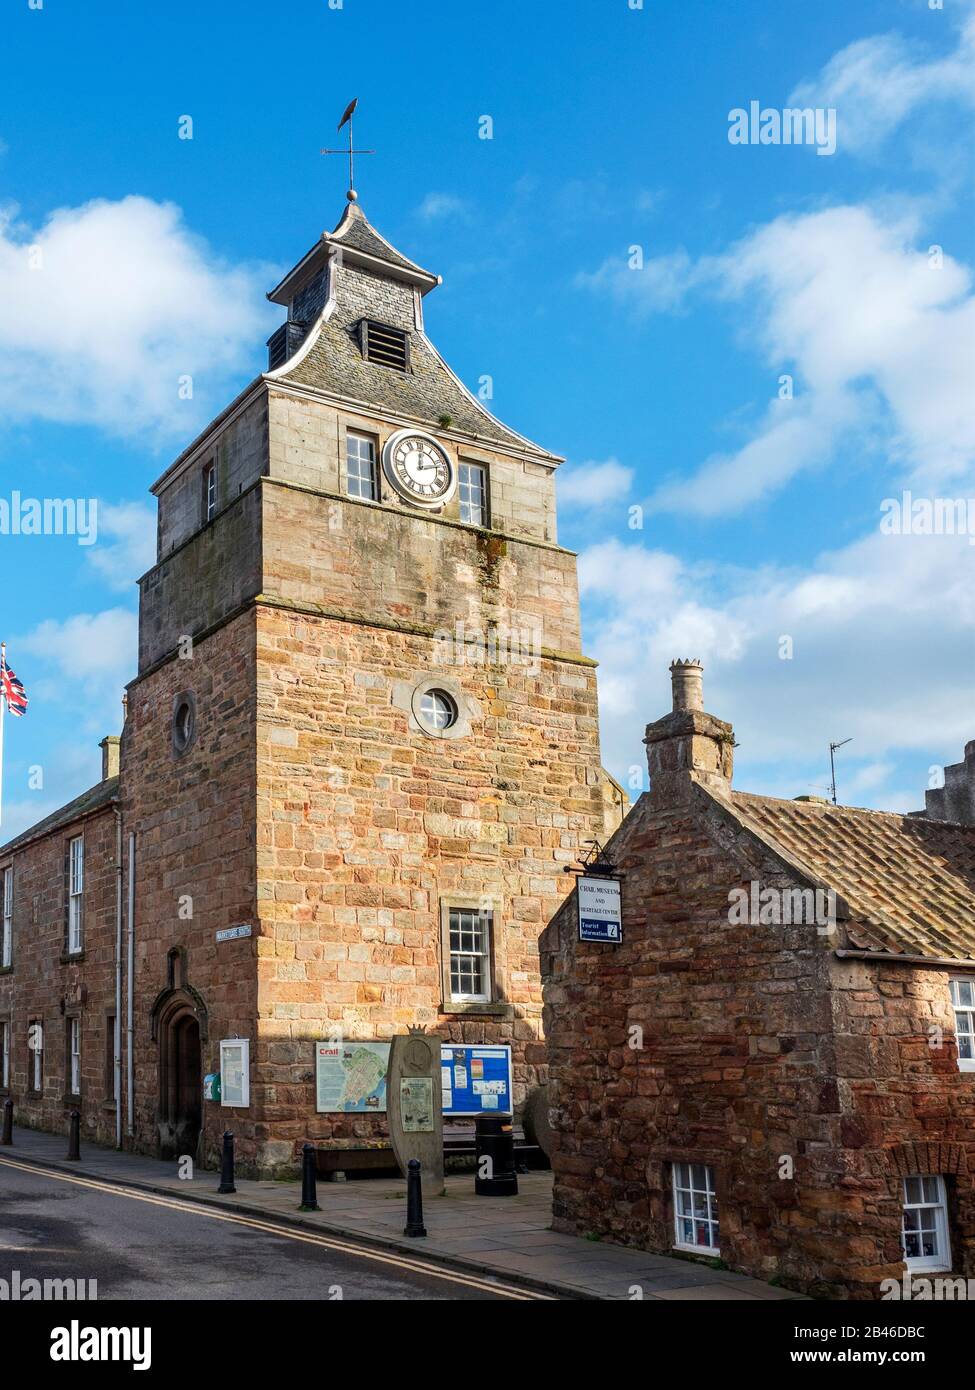 The Tolbooth on Marketgate in Crail East Neuk of Fife Scotland Stock Photo